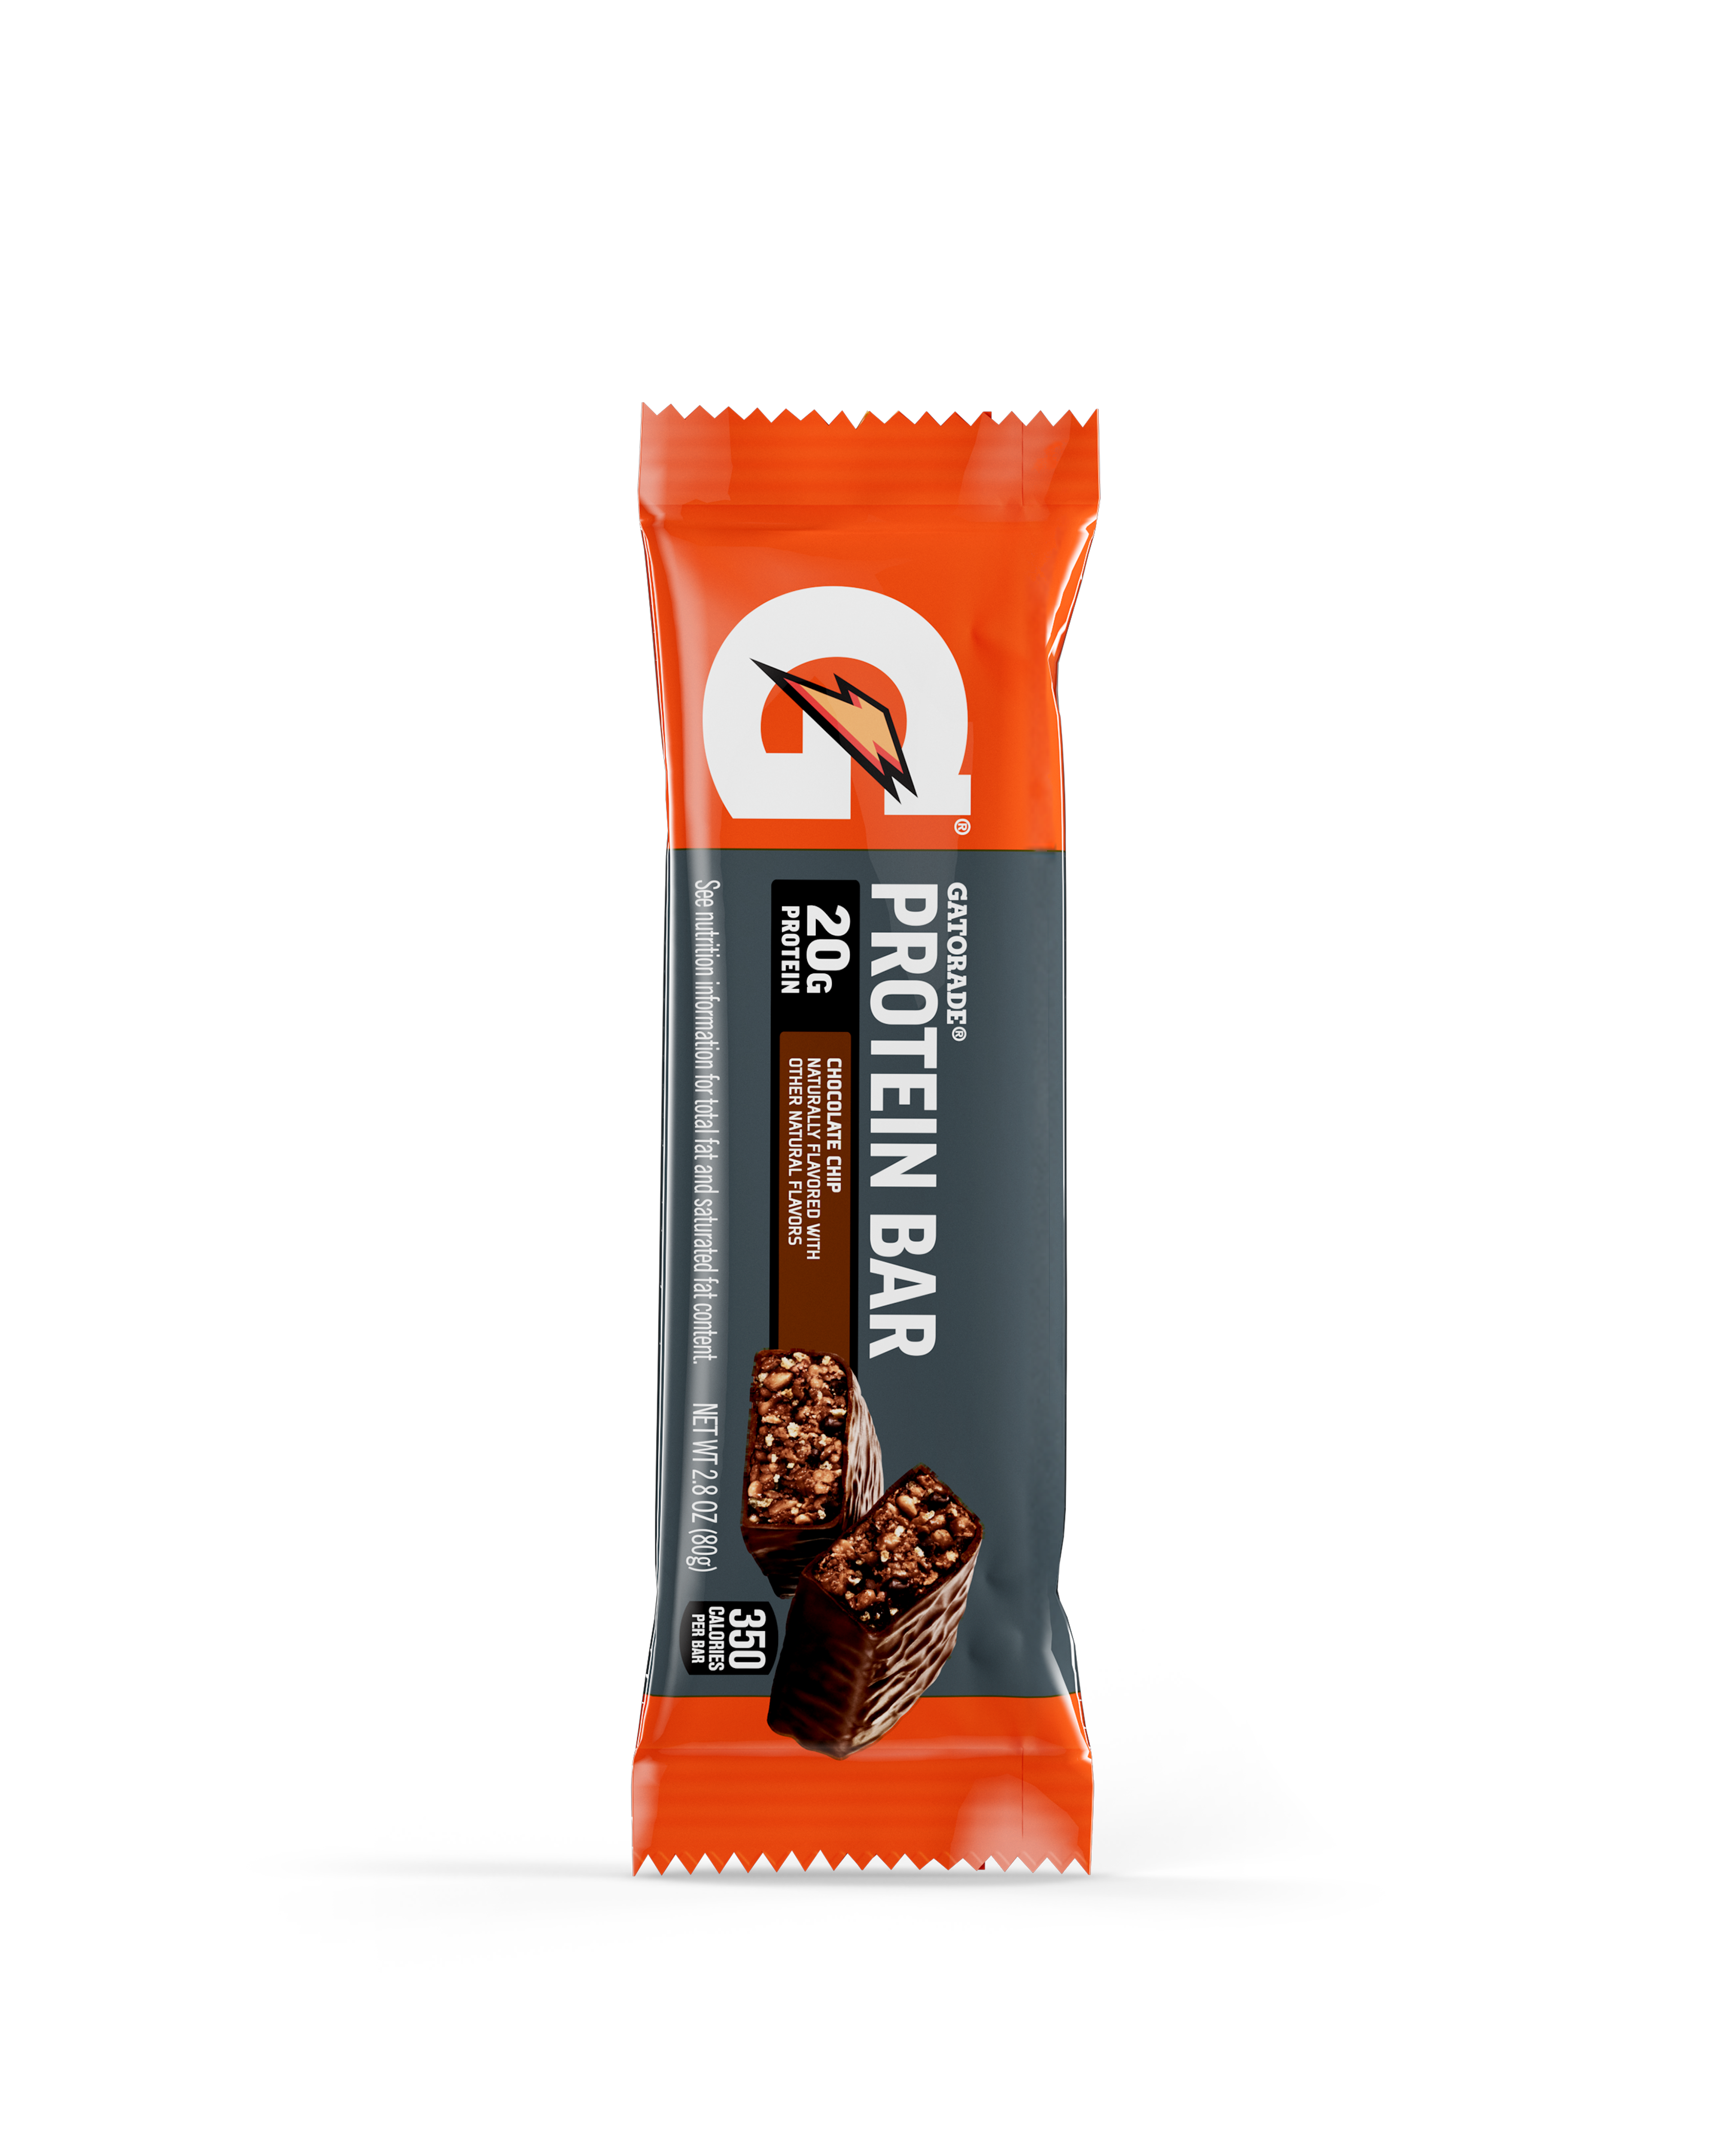 https://www.datocms-assets.com/101859/1691775134-10052000104322_proteinbars_chocolatechip_producttile_2680x3344.png?auto=format&fit=max&w=3840